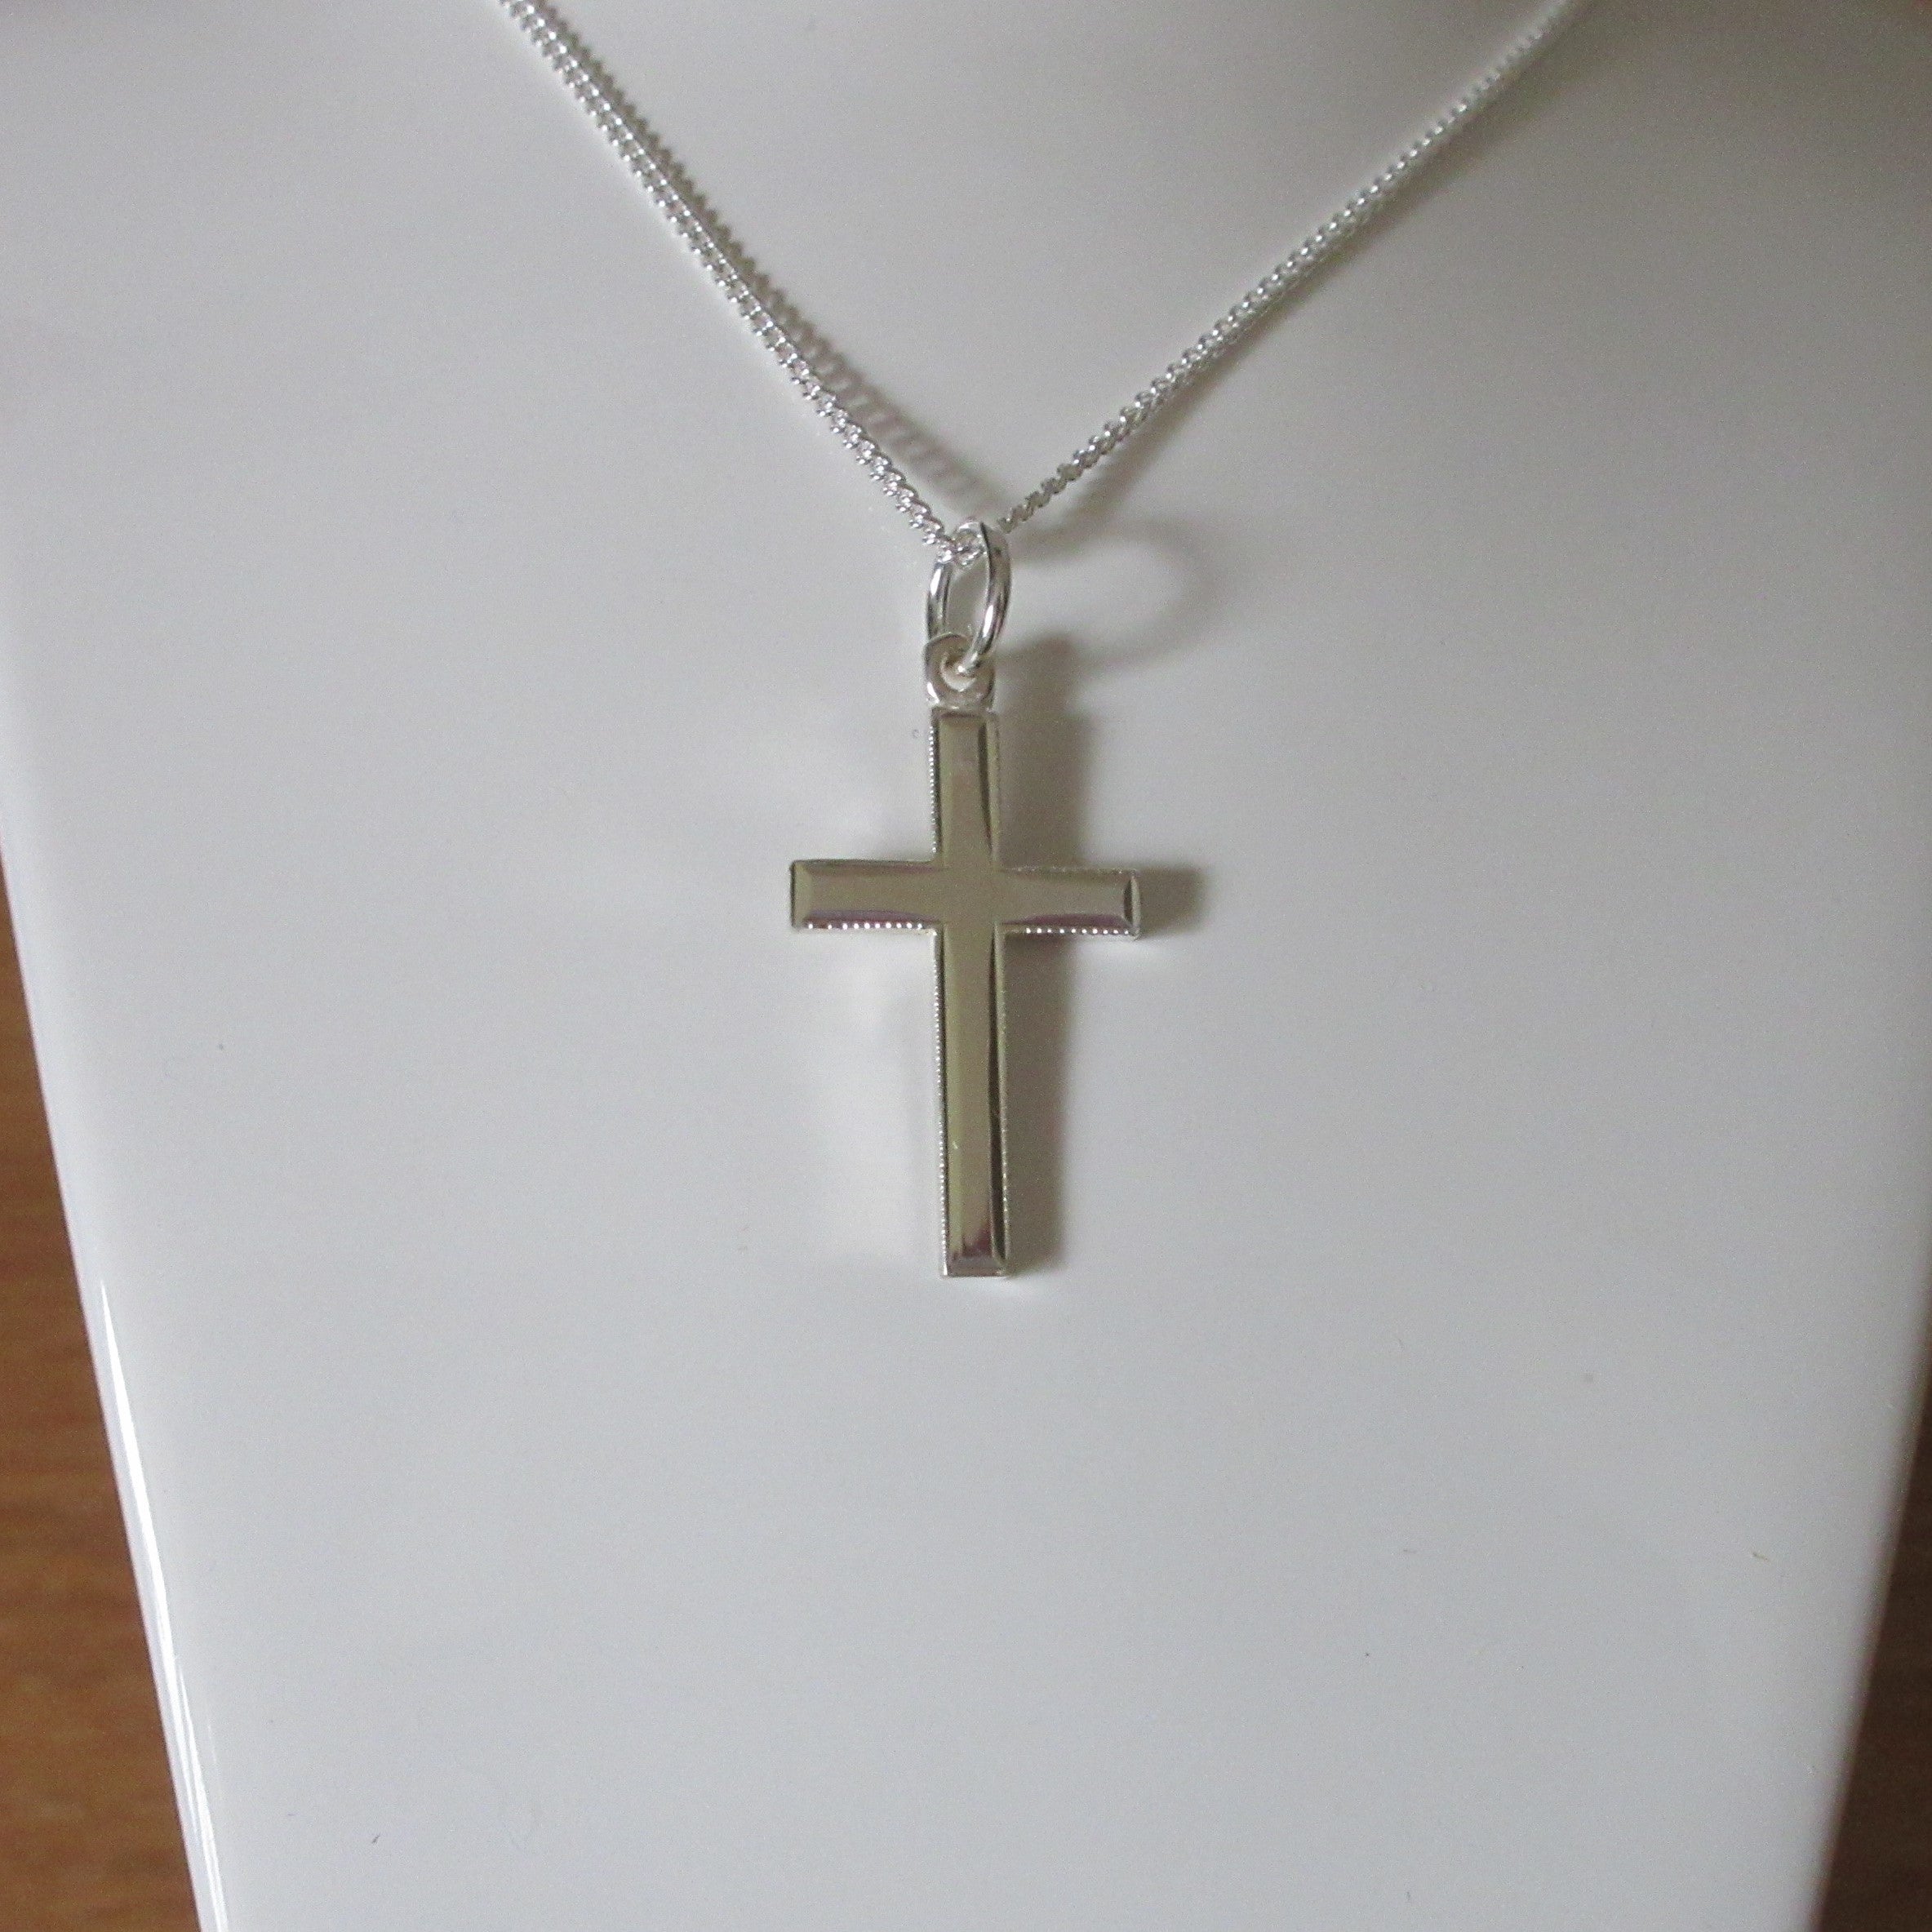 Silver Solid Cross Necklace